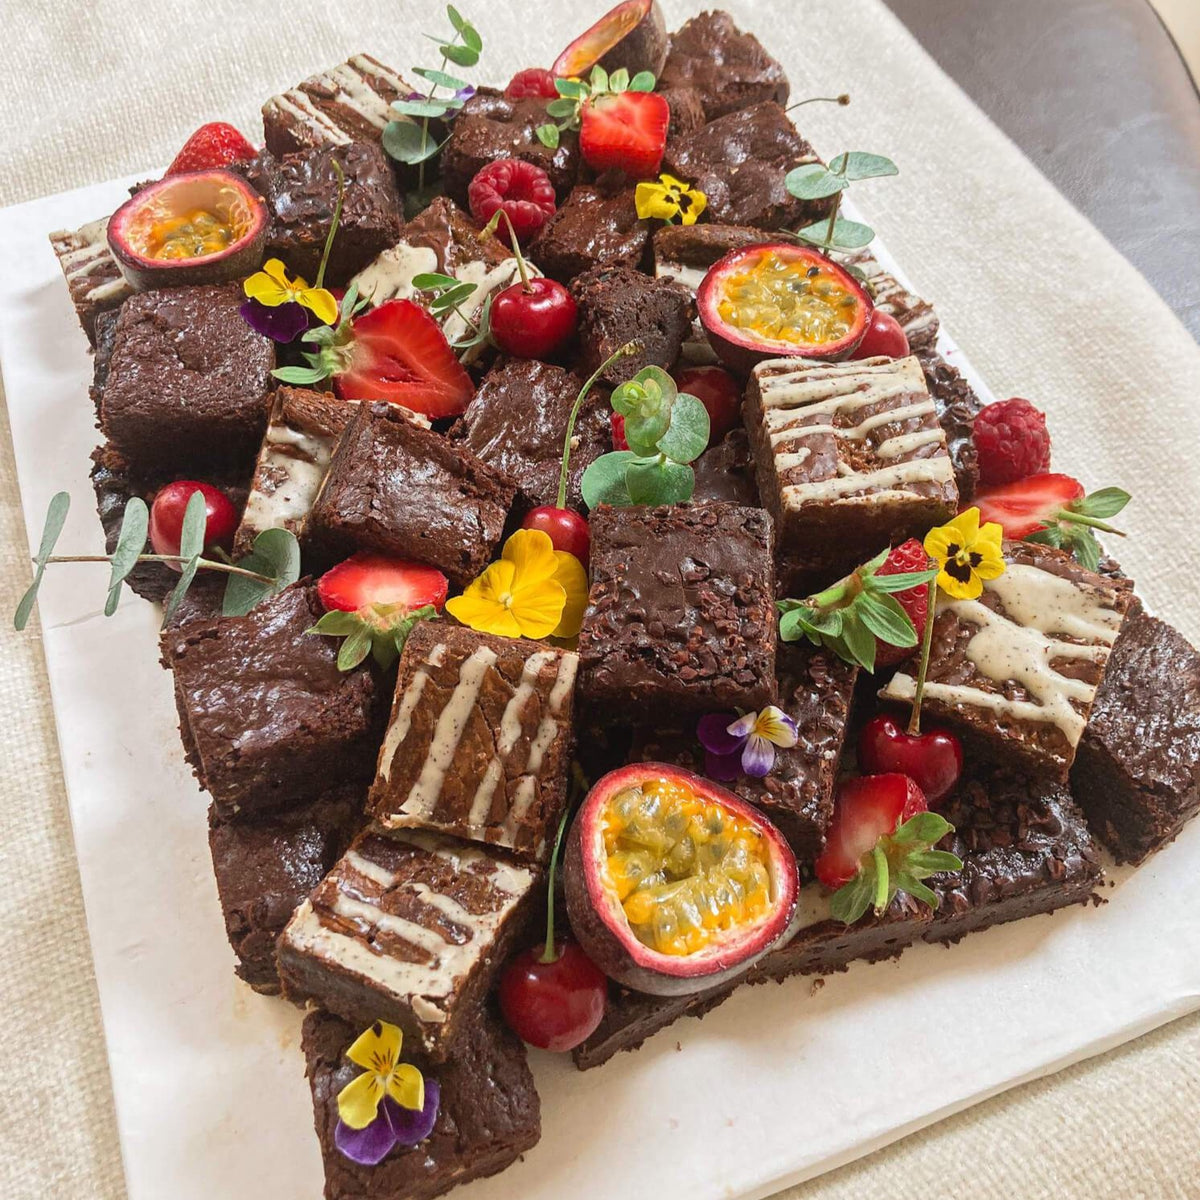 The Brownie Platter